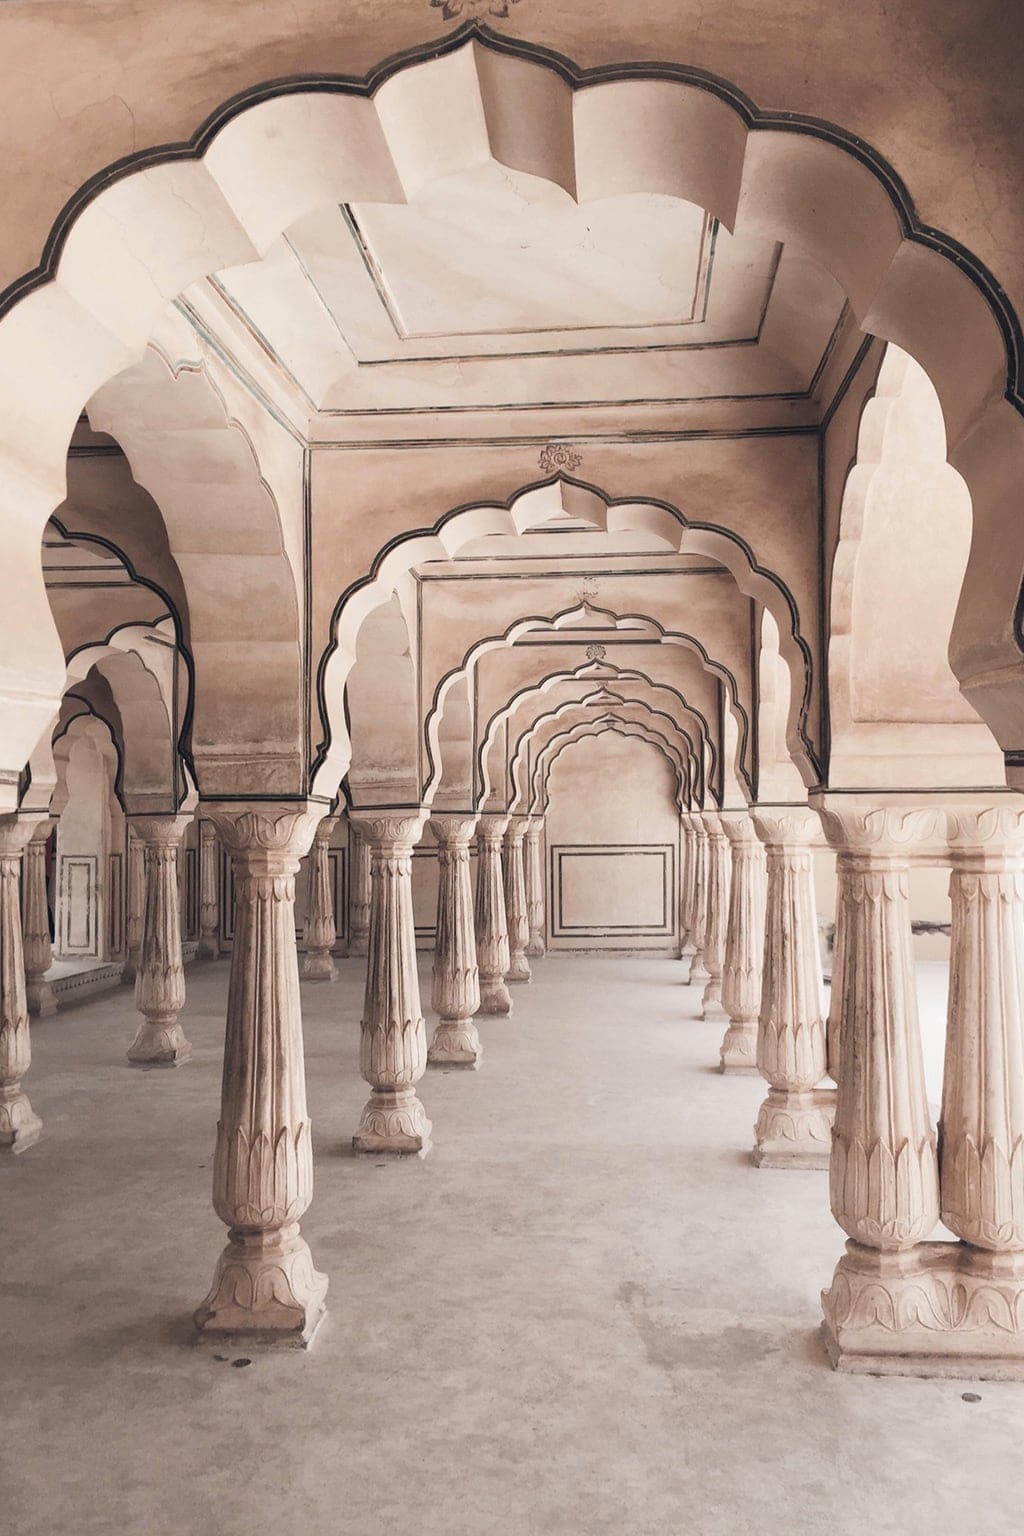 Amber Fort, the epitome of Rajasthani Charm